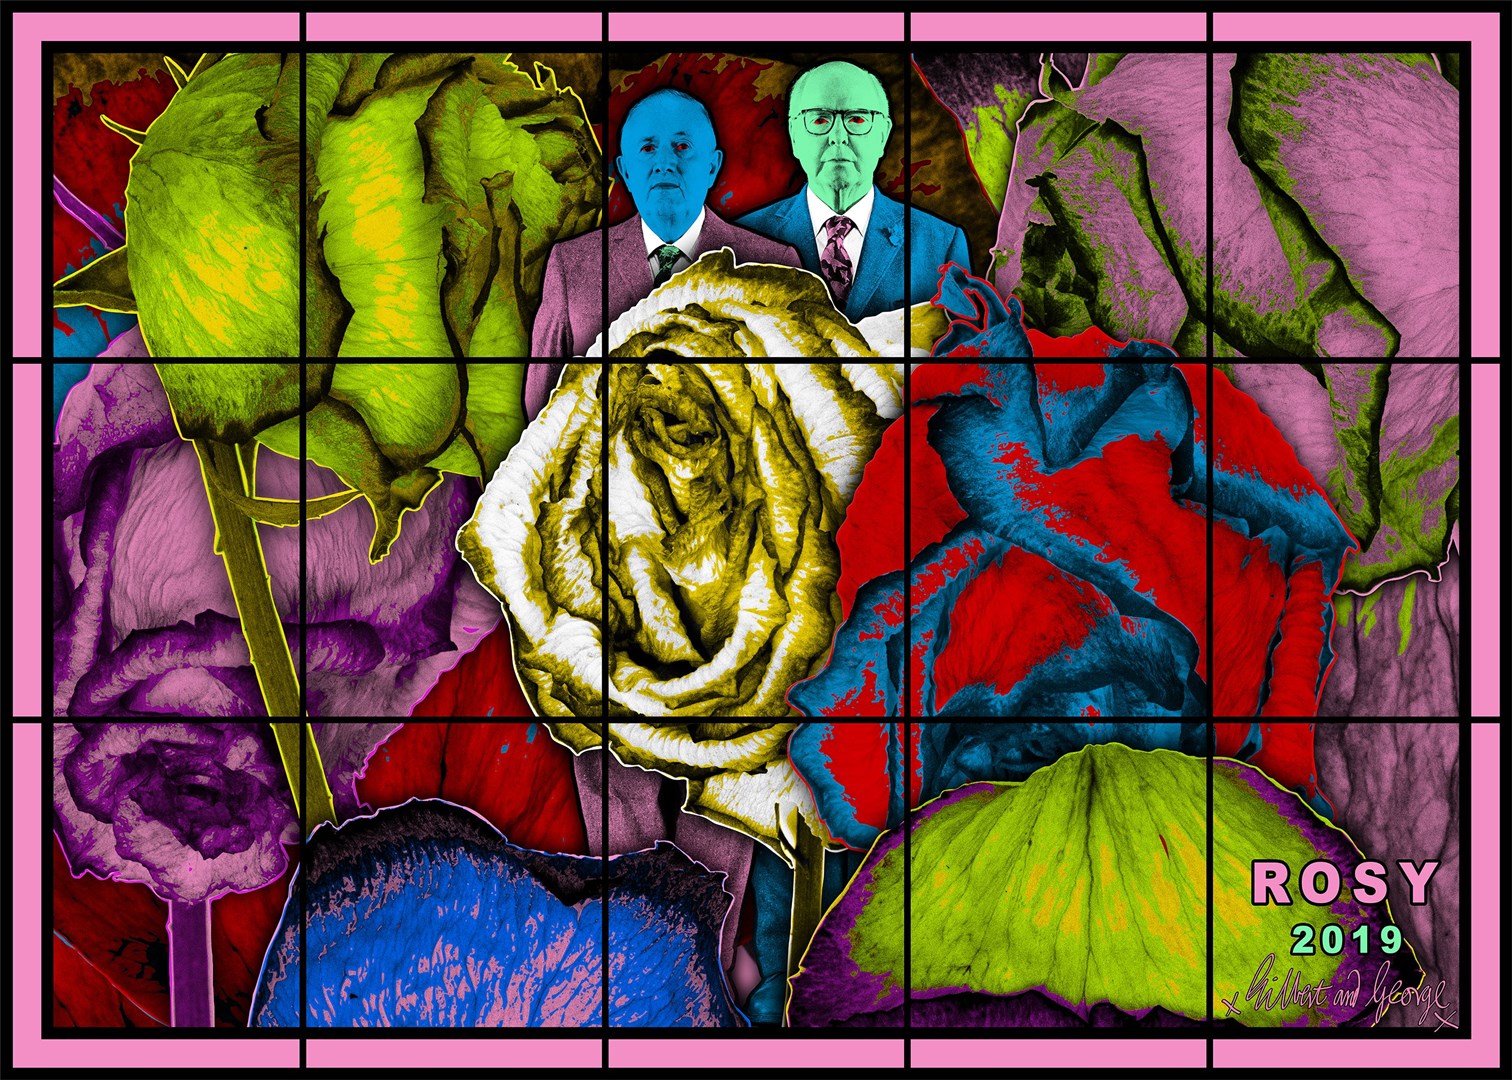 Rosy by Gilbert & George from The Paradisical Pictures (The Gilbert & George Centre/PA)